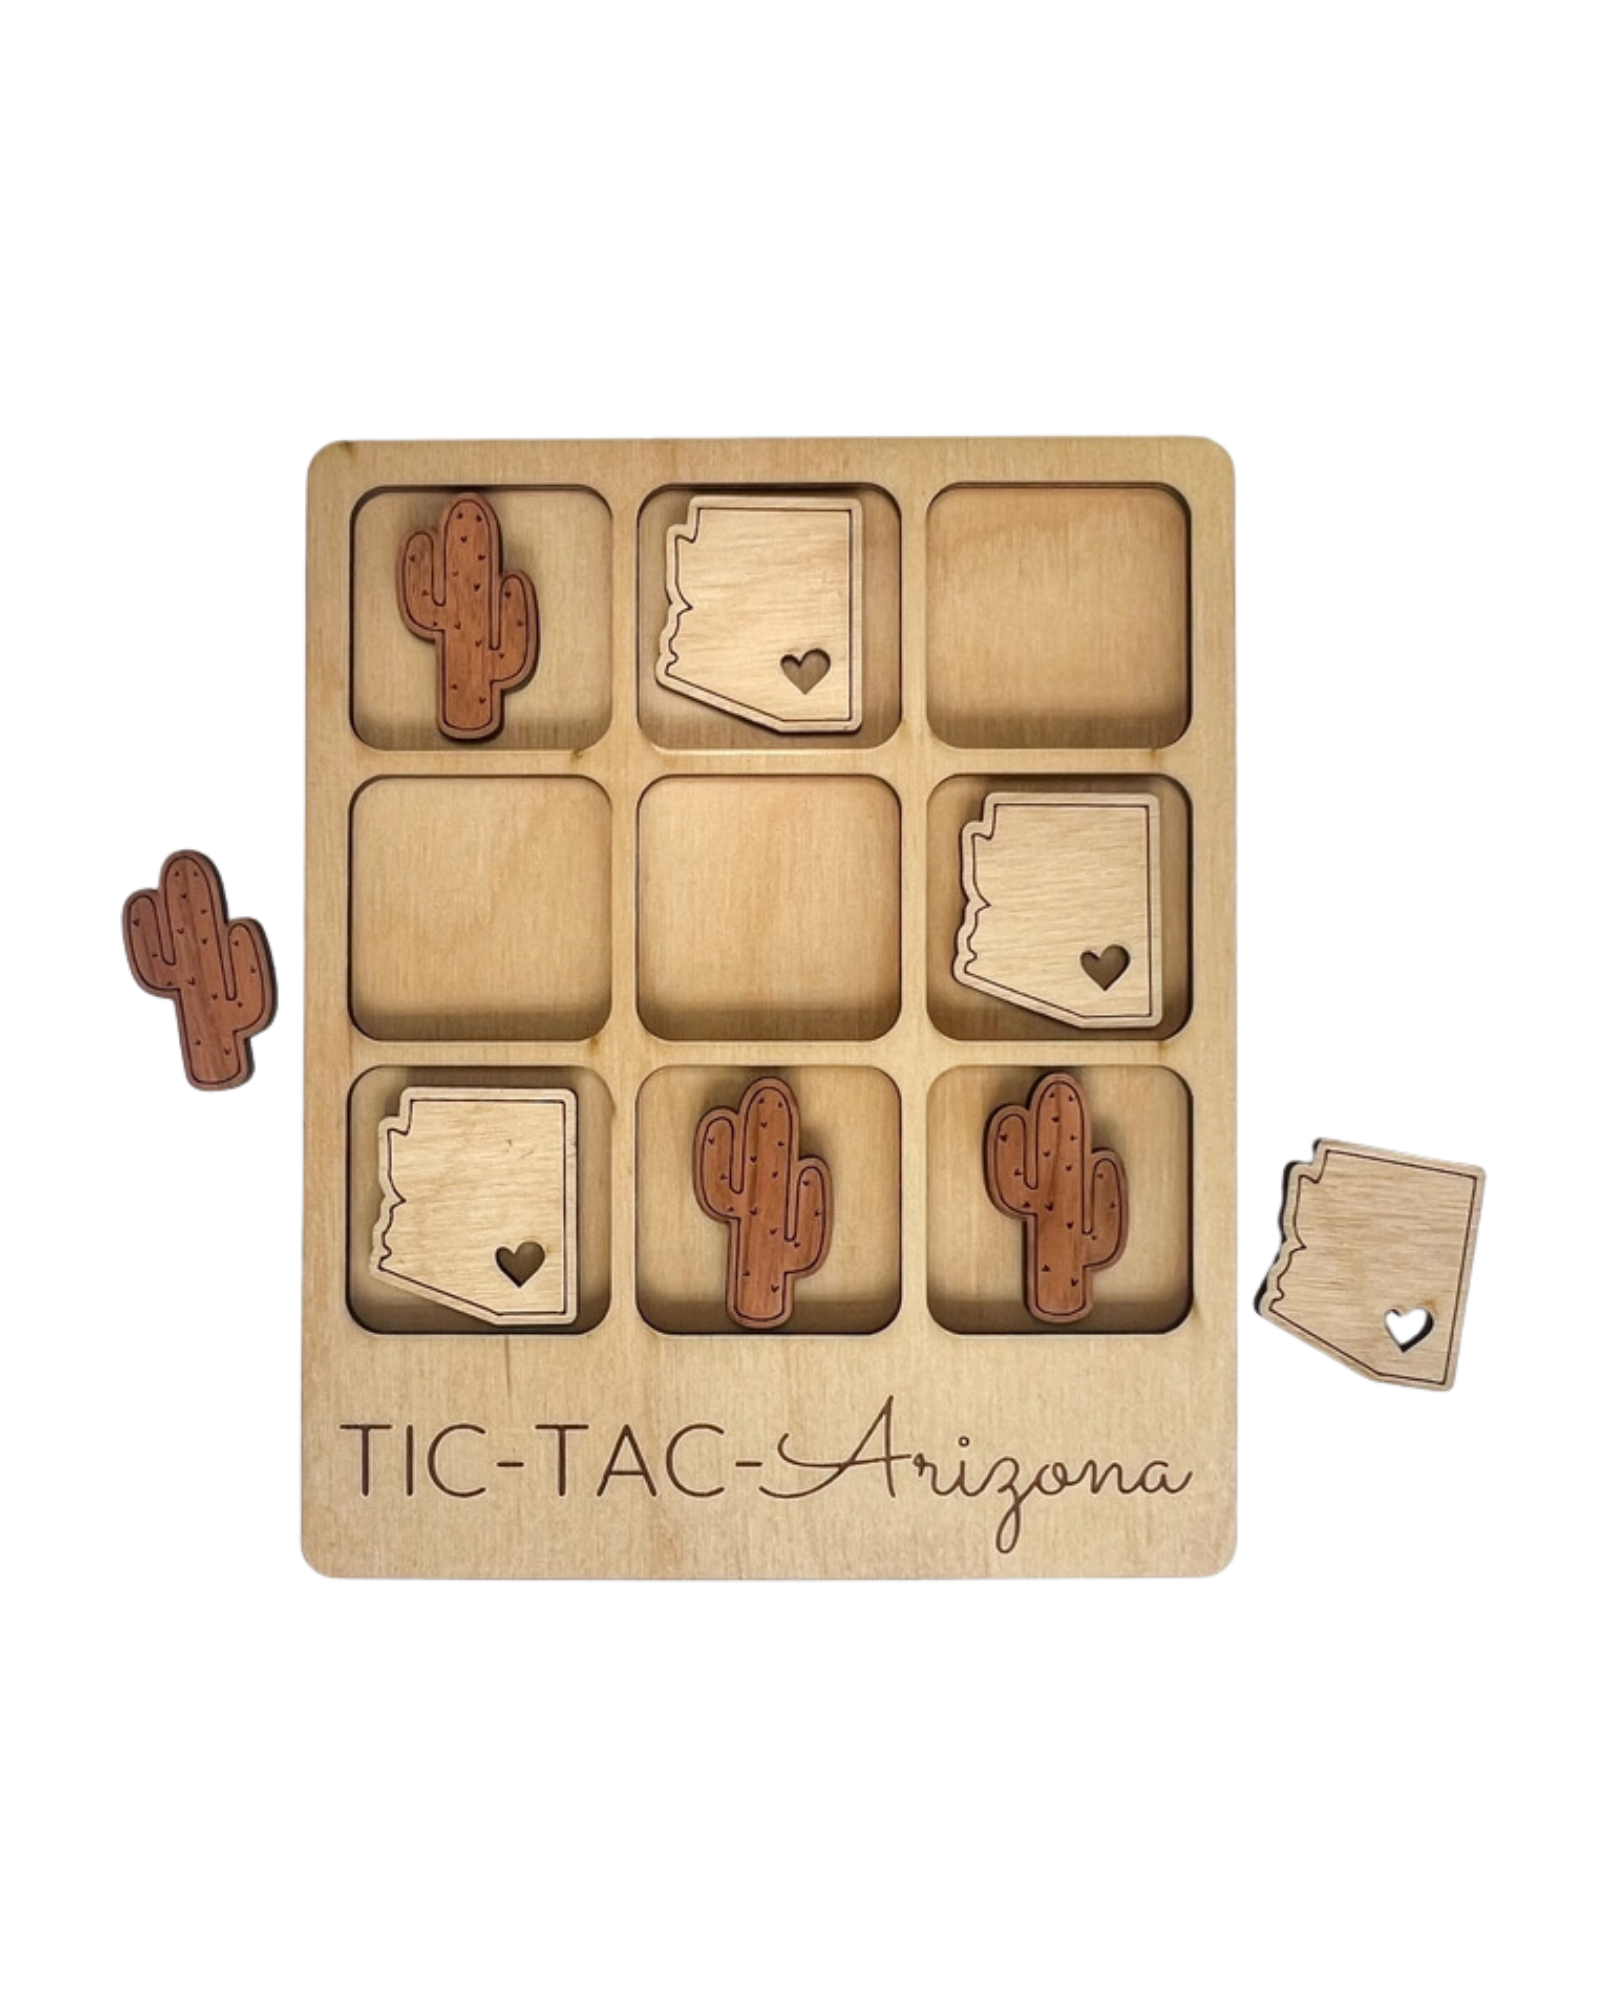 Light wood tic-tac-toe board with saguaro cacti and arizona state cutouts for pieces